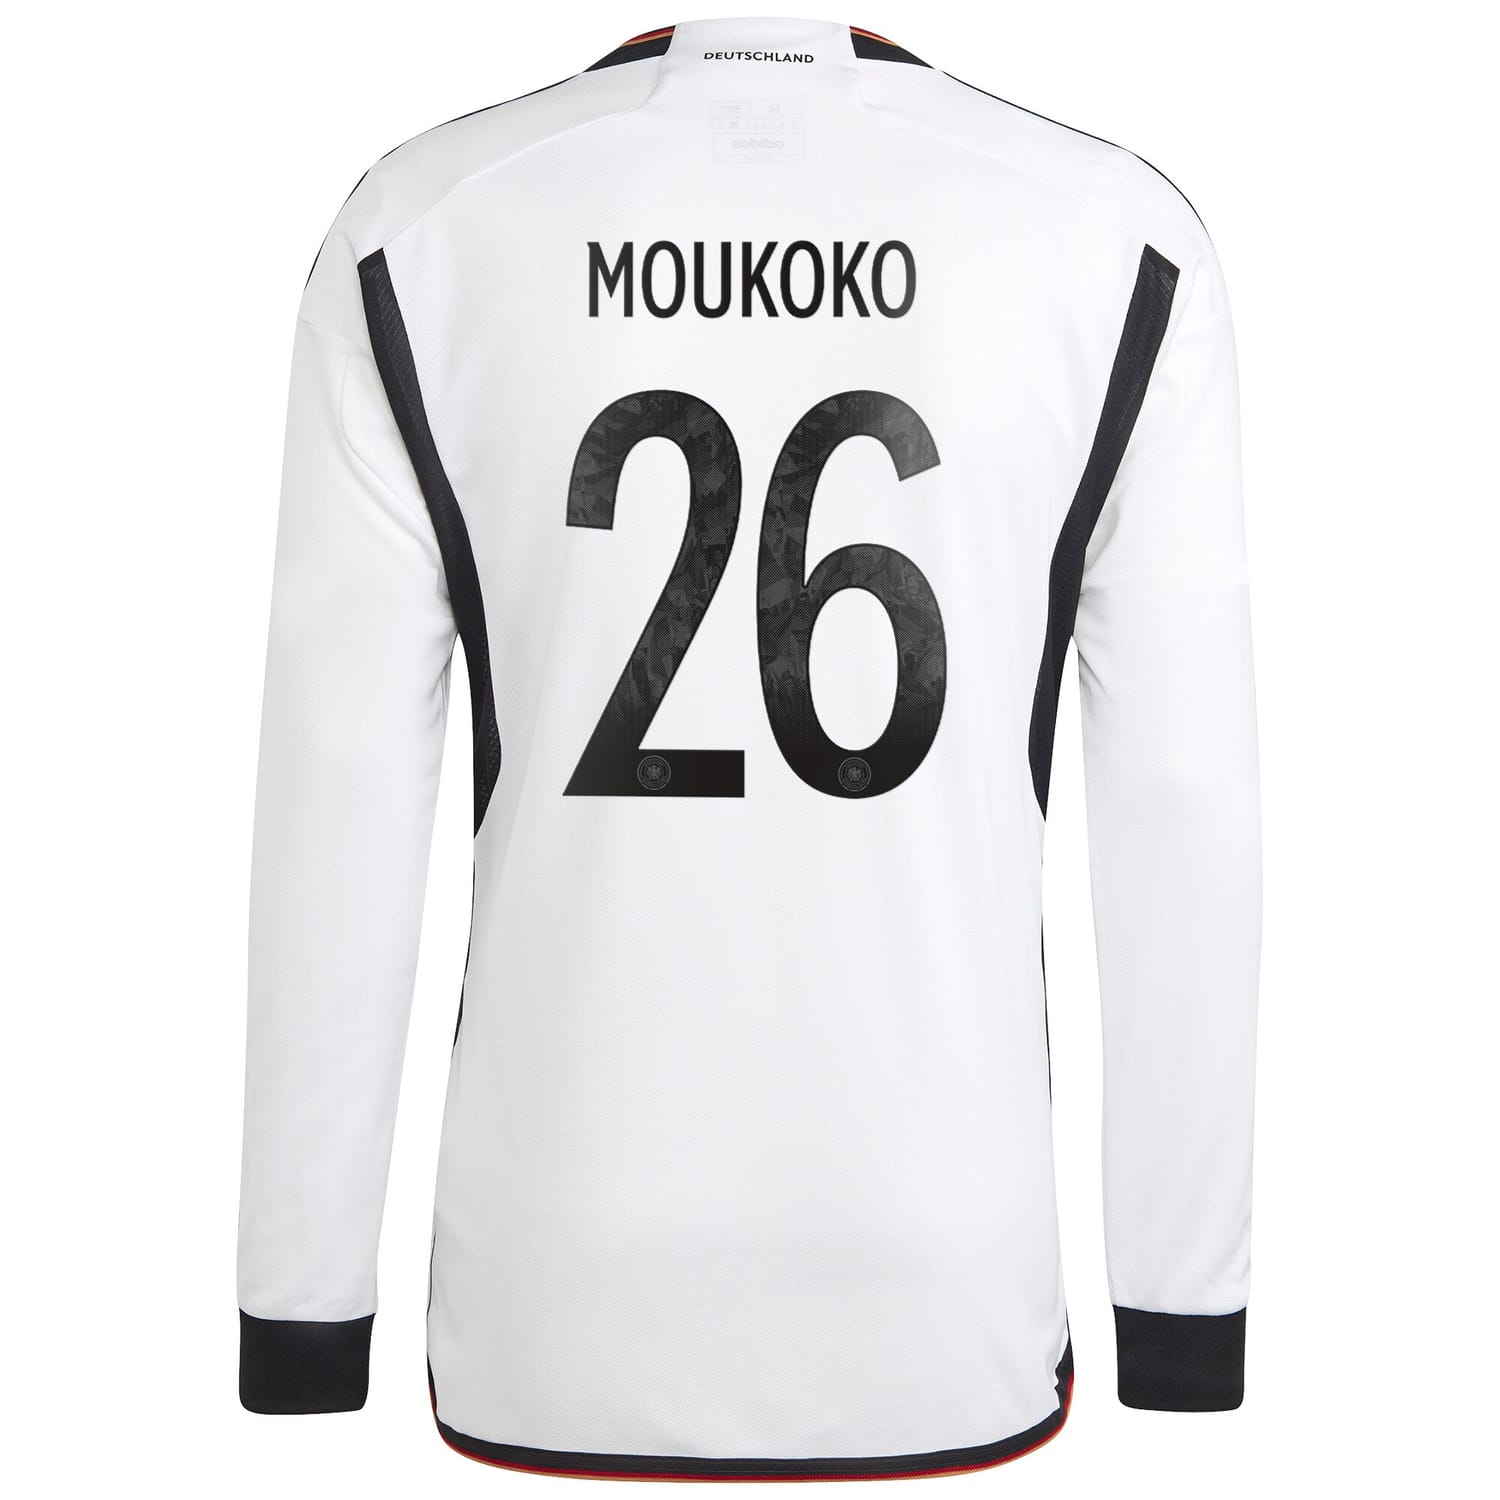 Germany National Team Home Jersey Shirt Long Sleeve 2022 player Youssoufa Moukoko 26 printing for Men